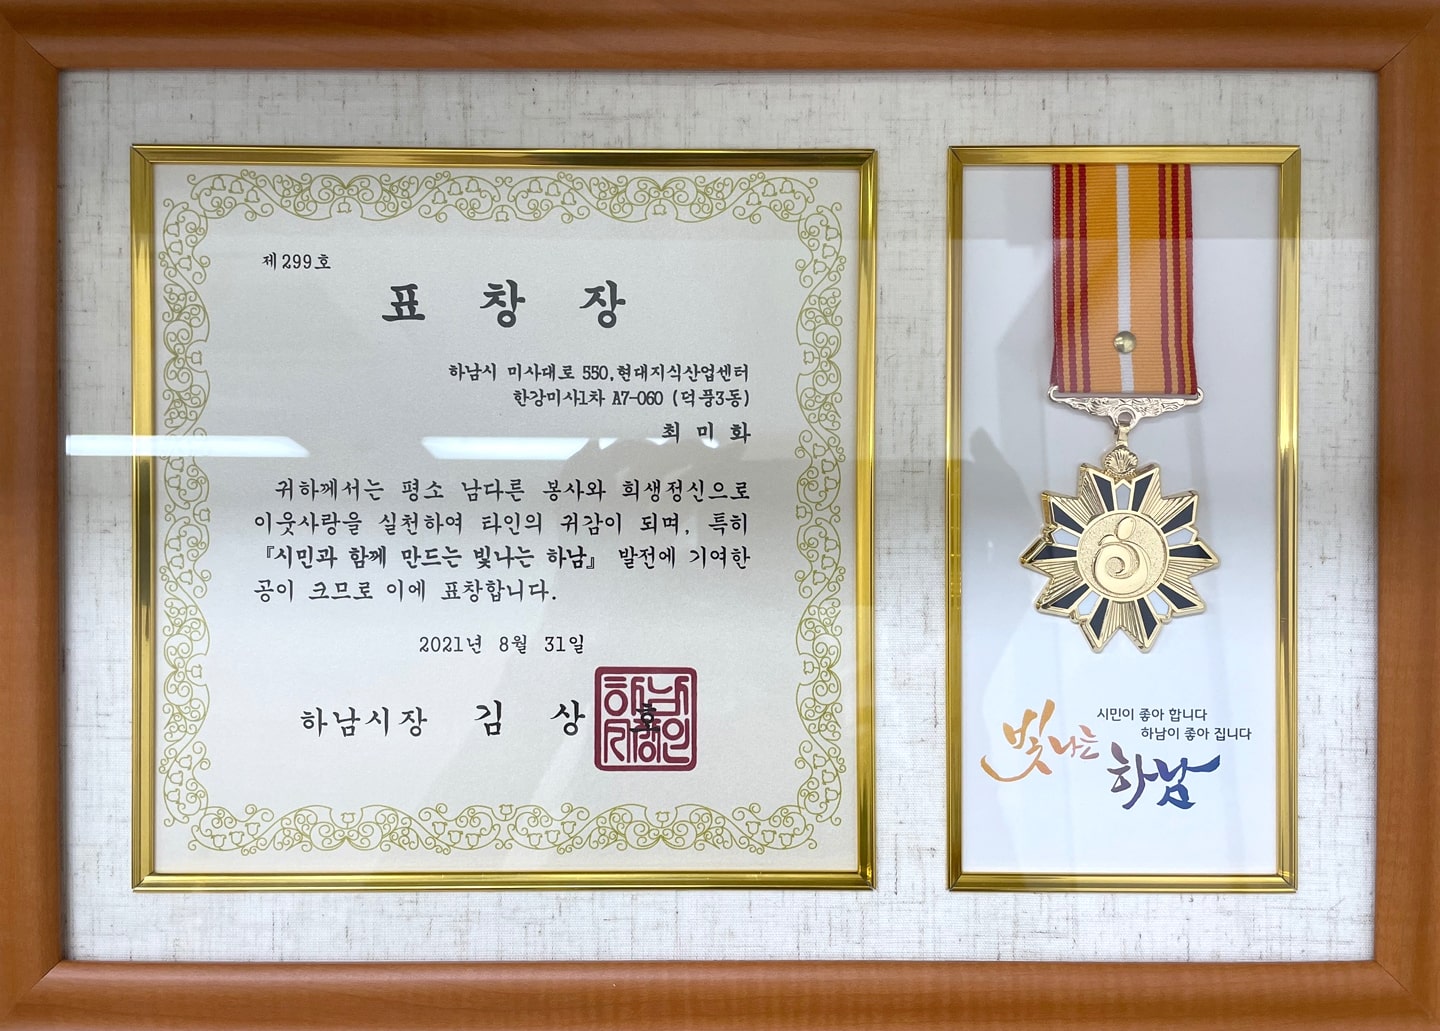 Mihwa Choi, CEO, Recieved an Award Certification from Hanam